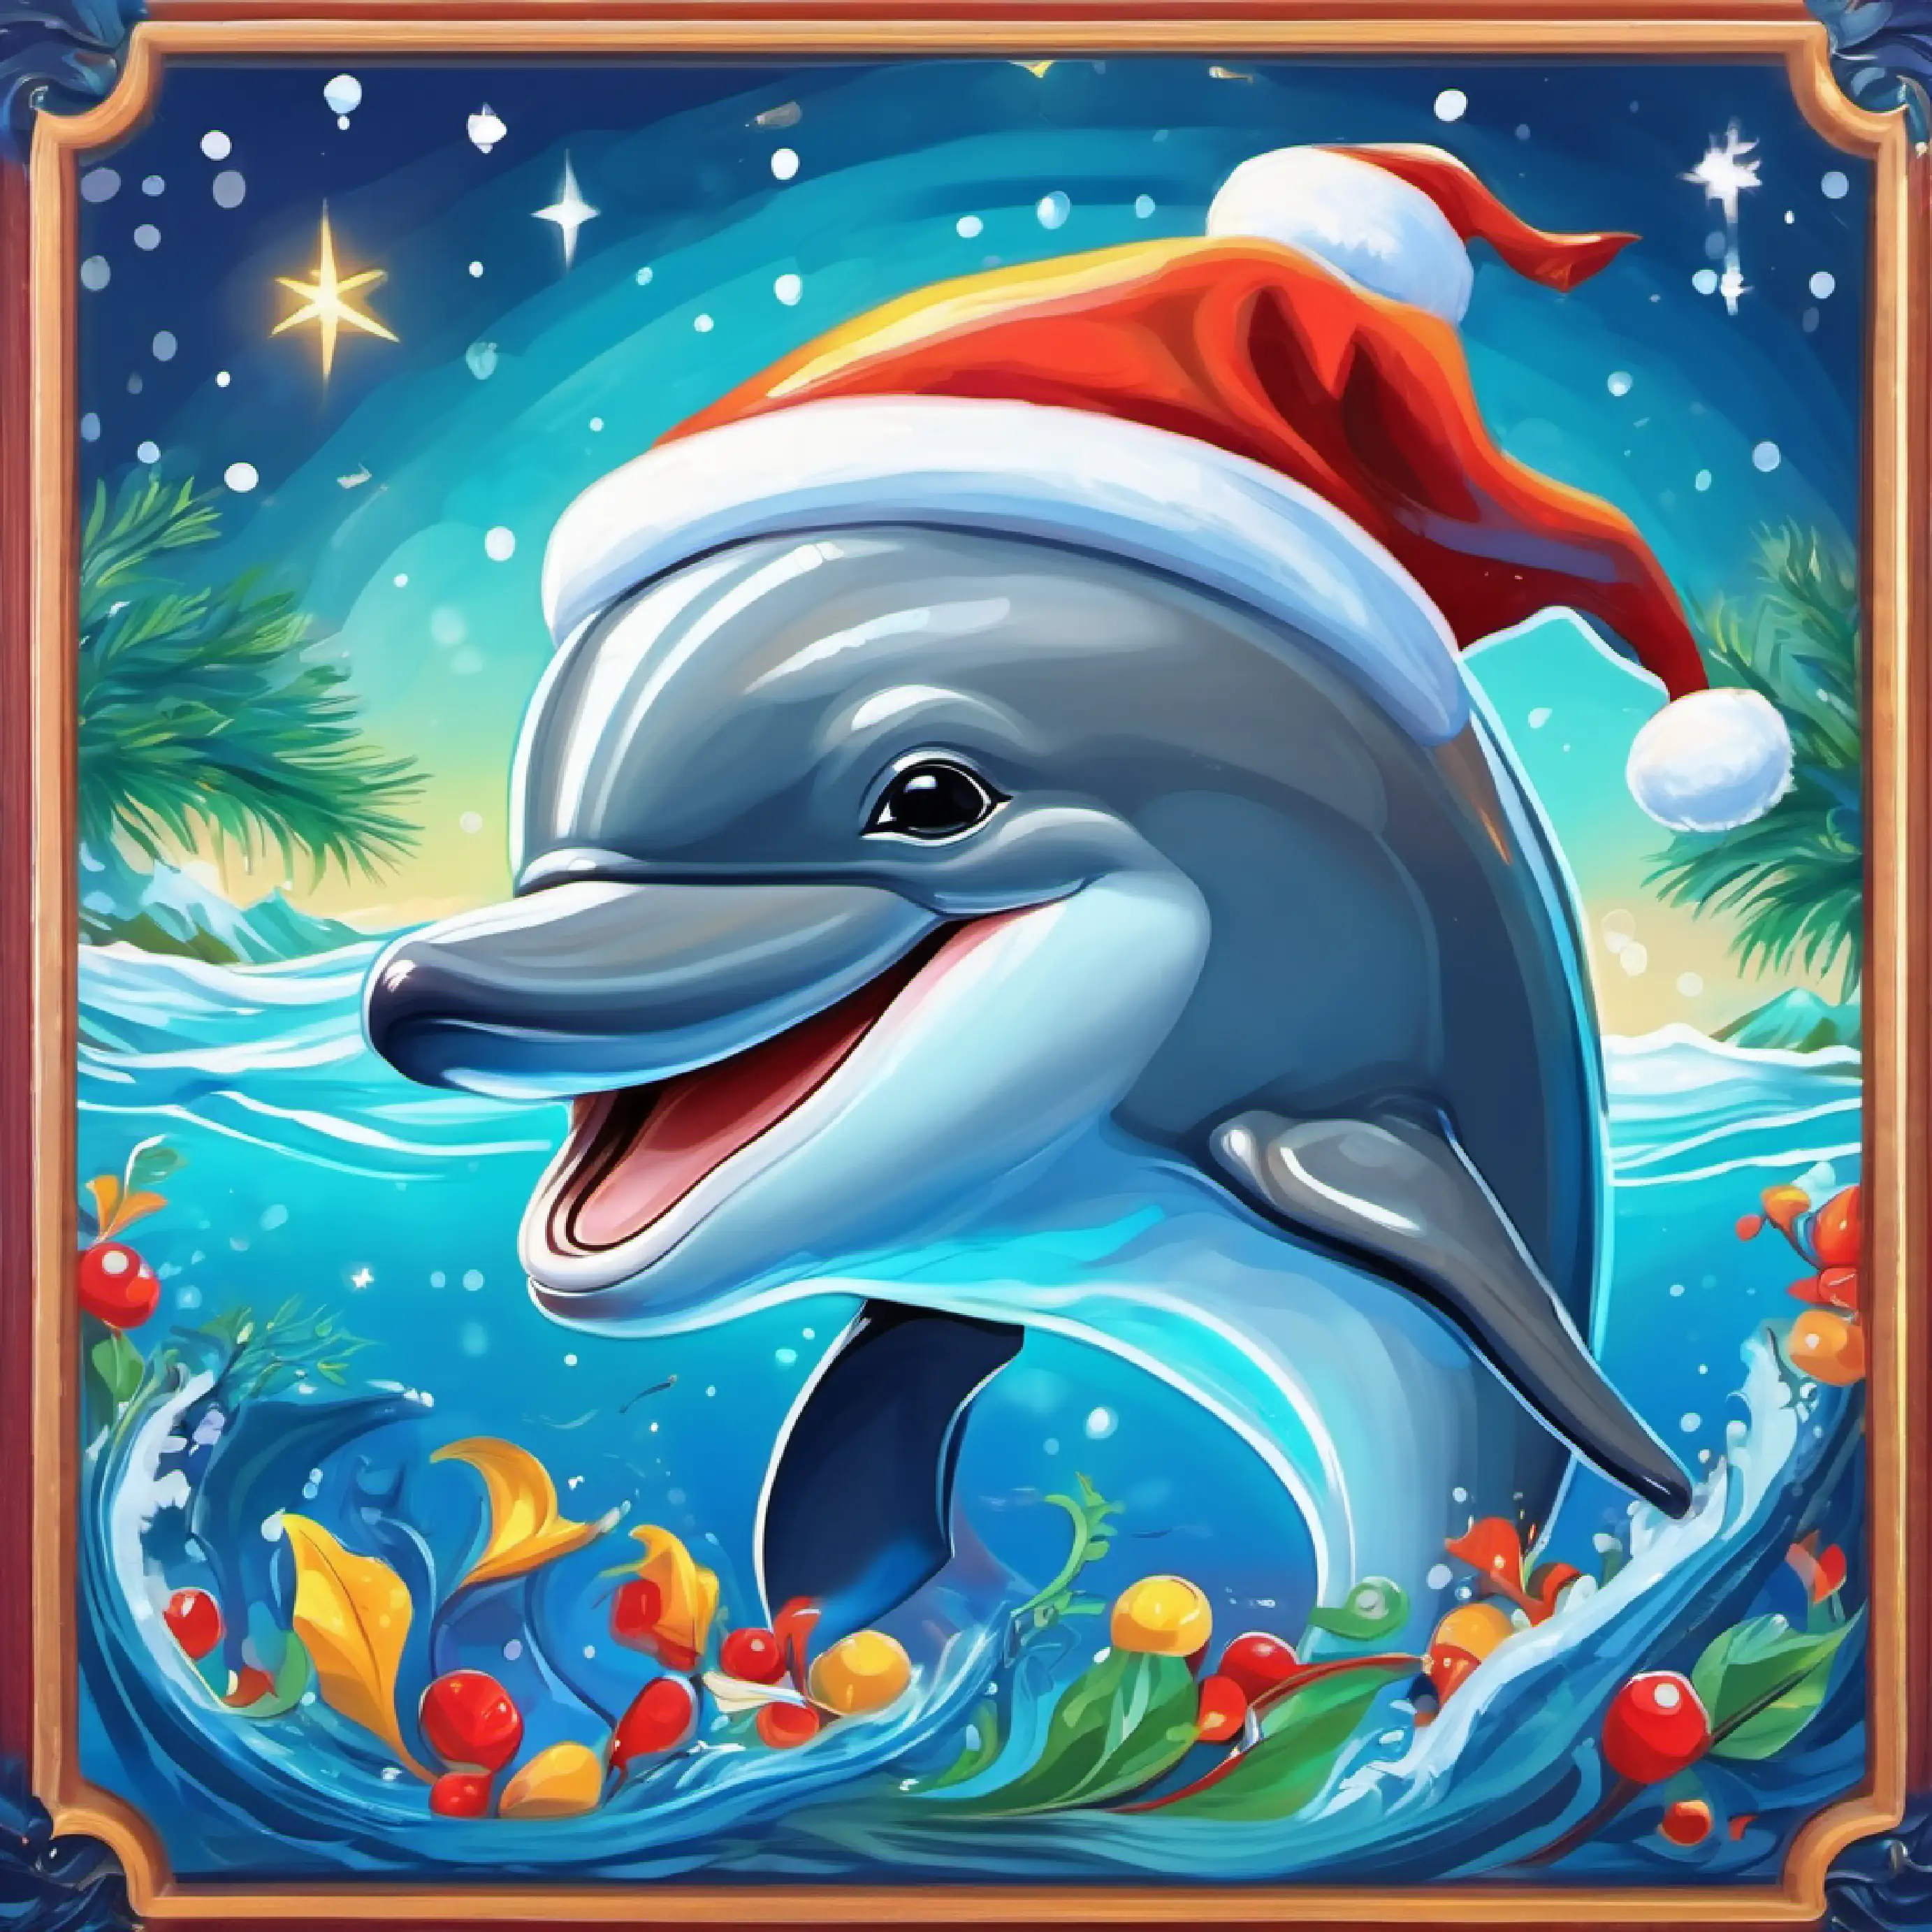 Playful dolphin, sleek skin, friendly dark eyes, the dolphin, sees himself and displays happiness.